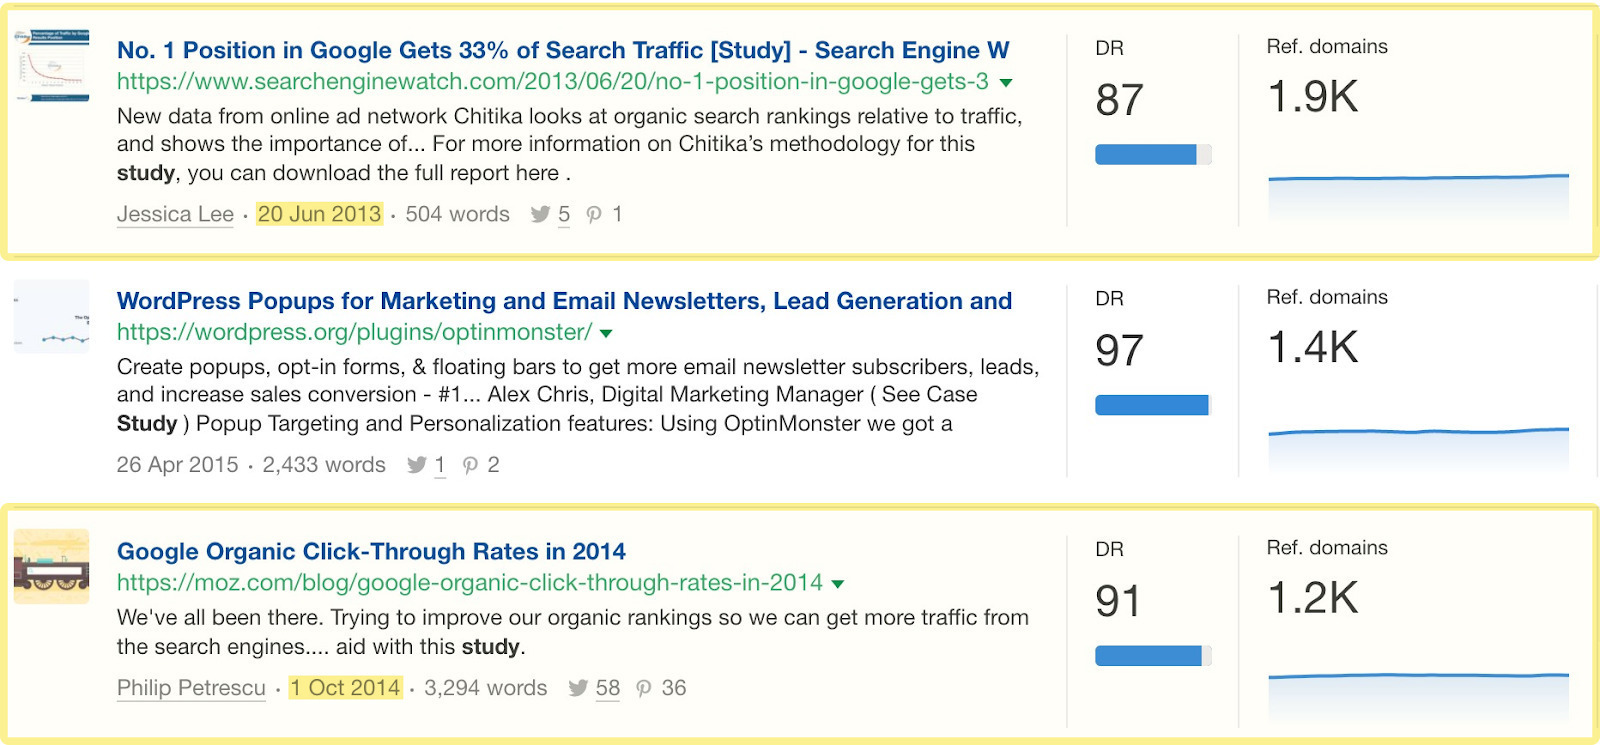 Finding outdated but popular studies, via Ahrefs' Content Explorer